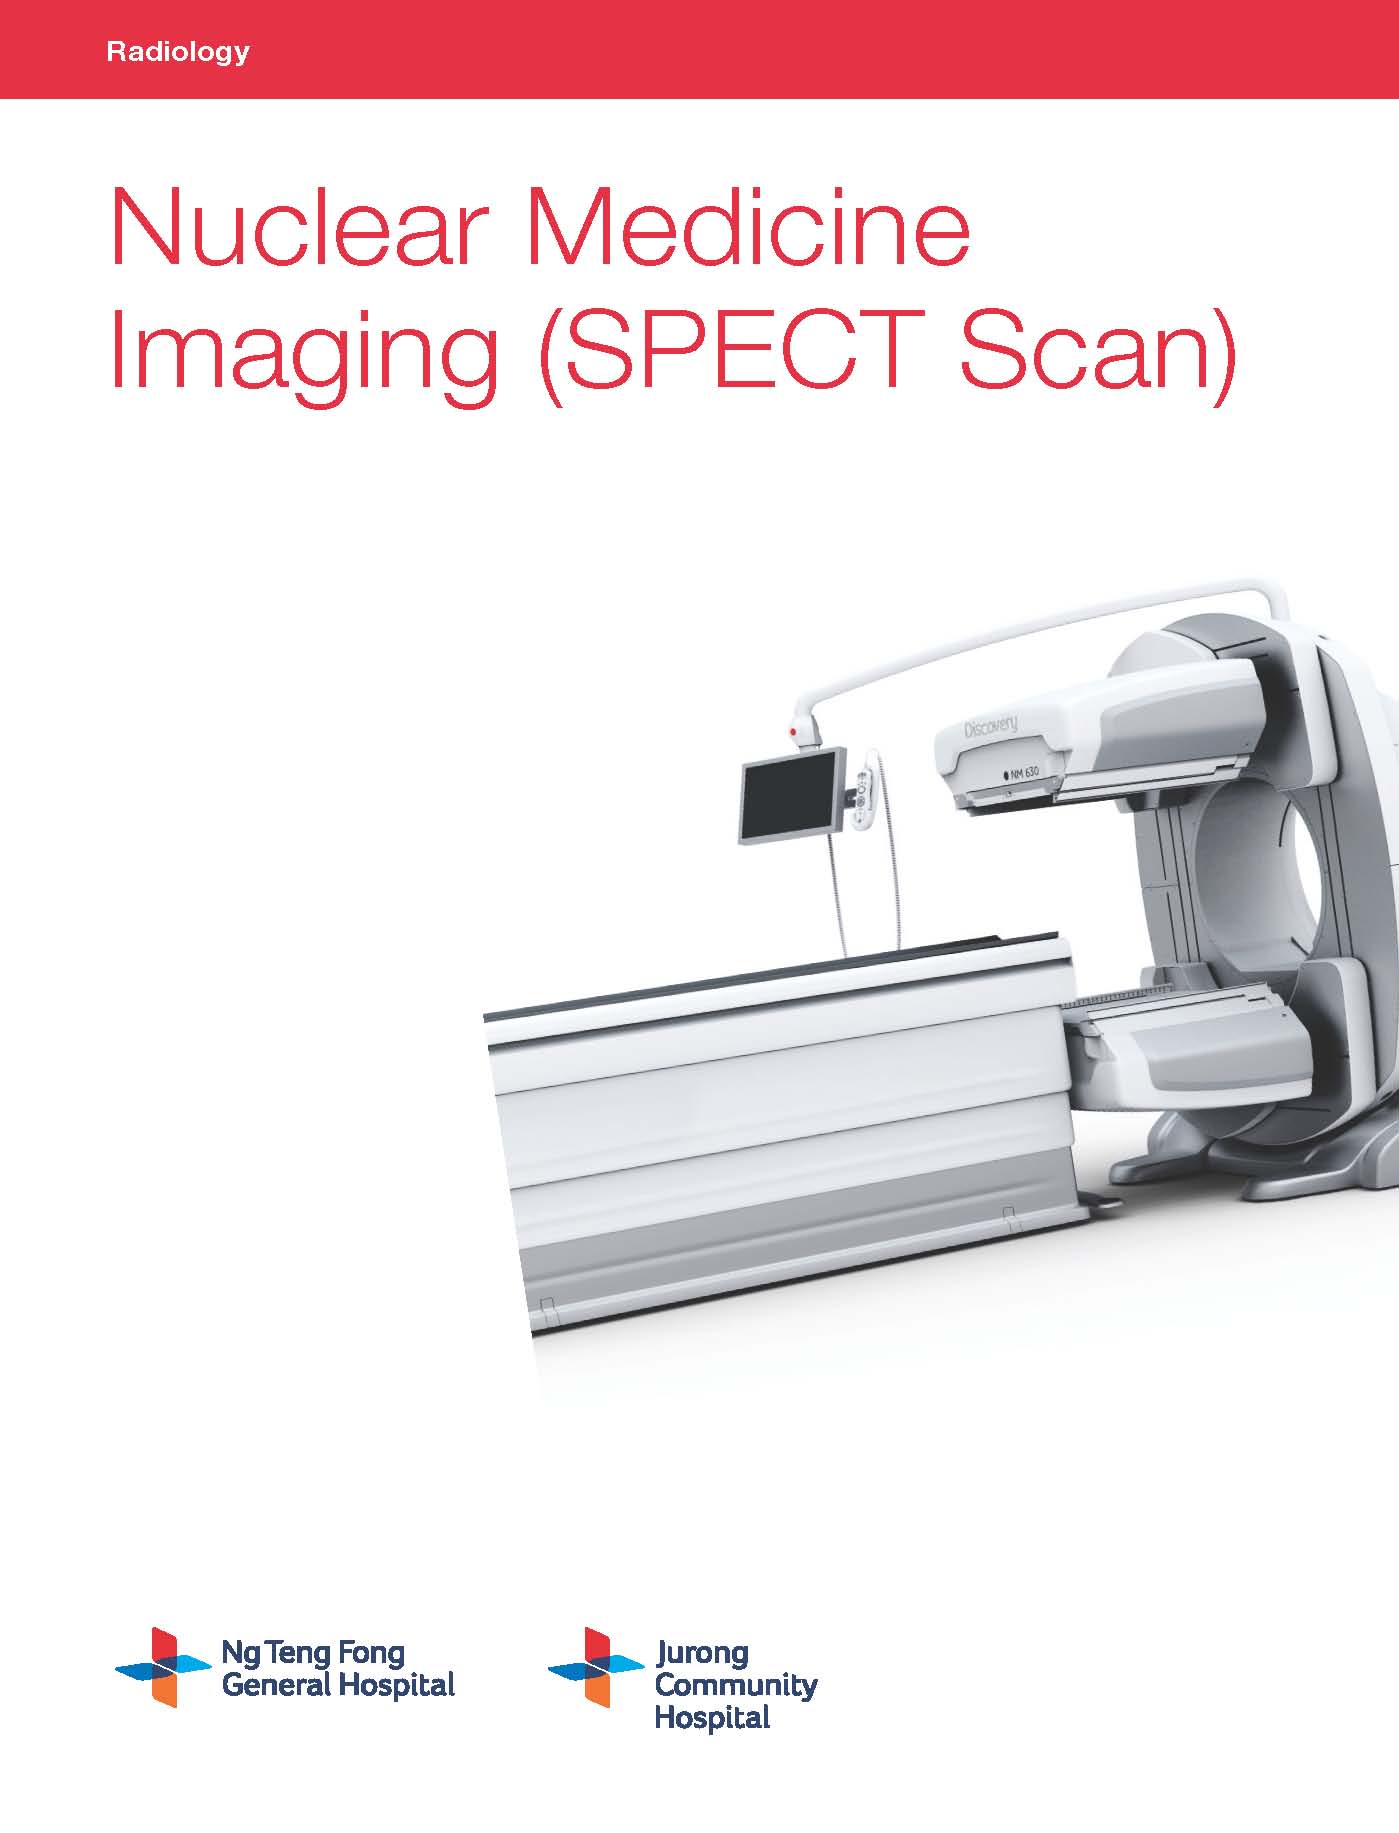 Nuclear Medicine Imaging (SPECT Scan)